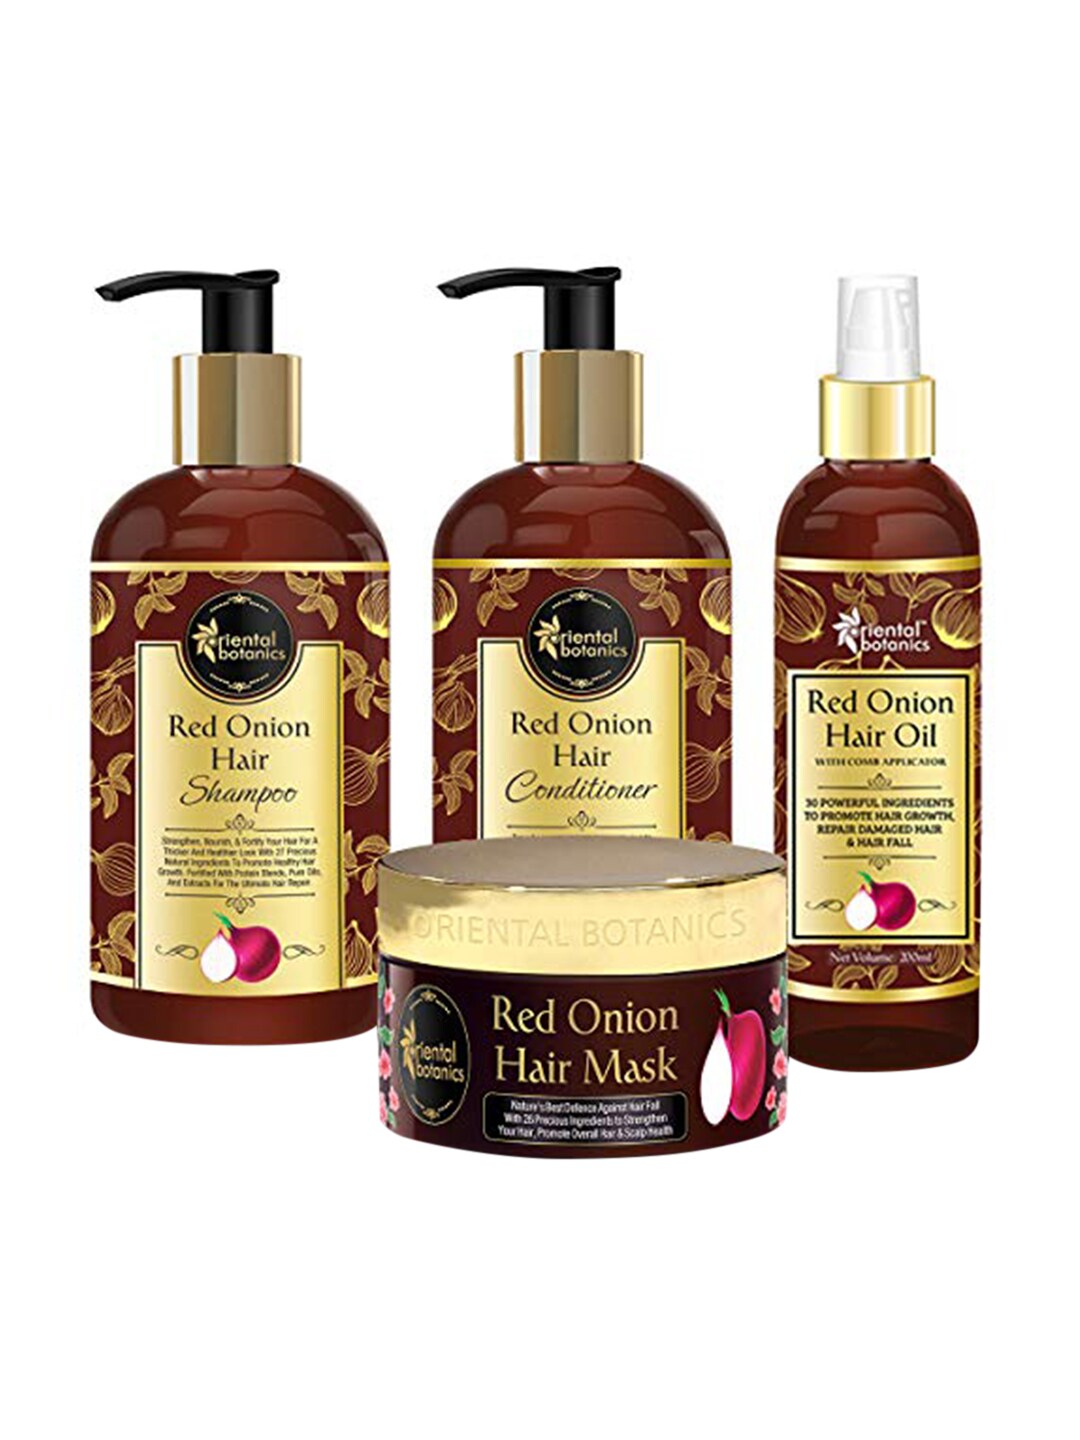 Oriental Botanics Red Onion Shampoo with Conditioner, Hair Oil & Hair Mask Price in India